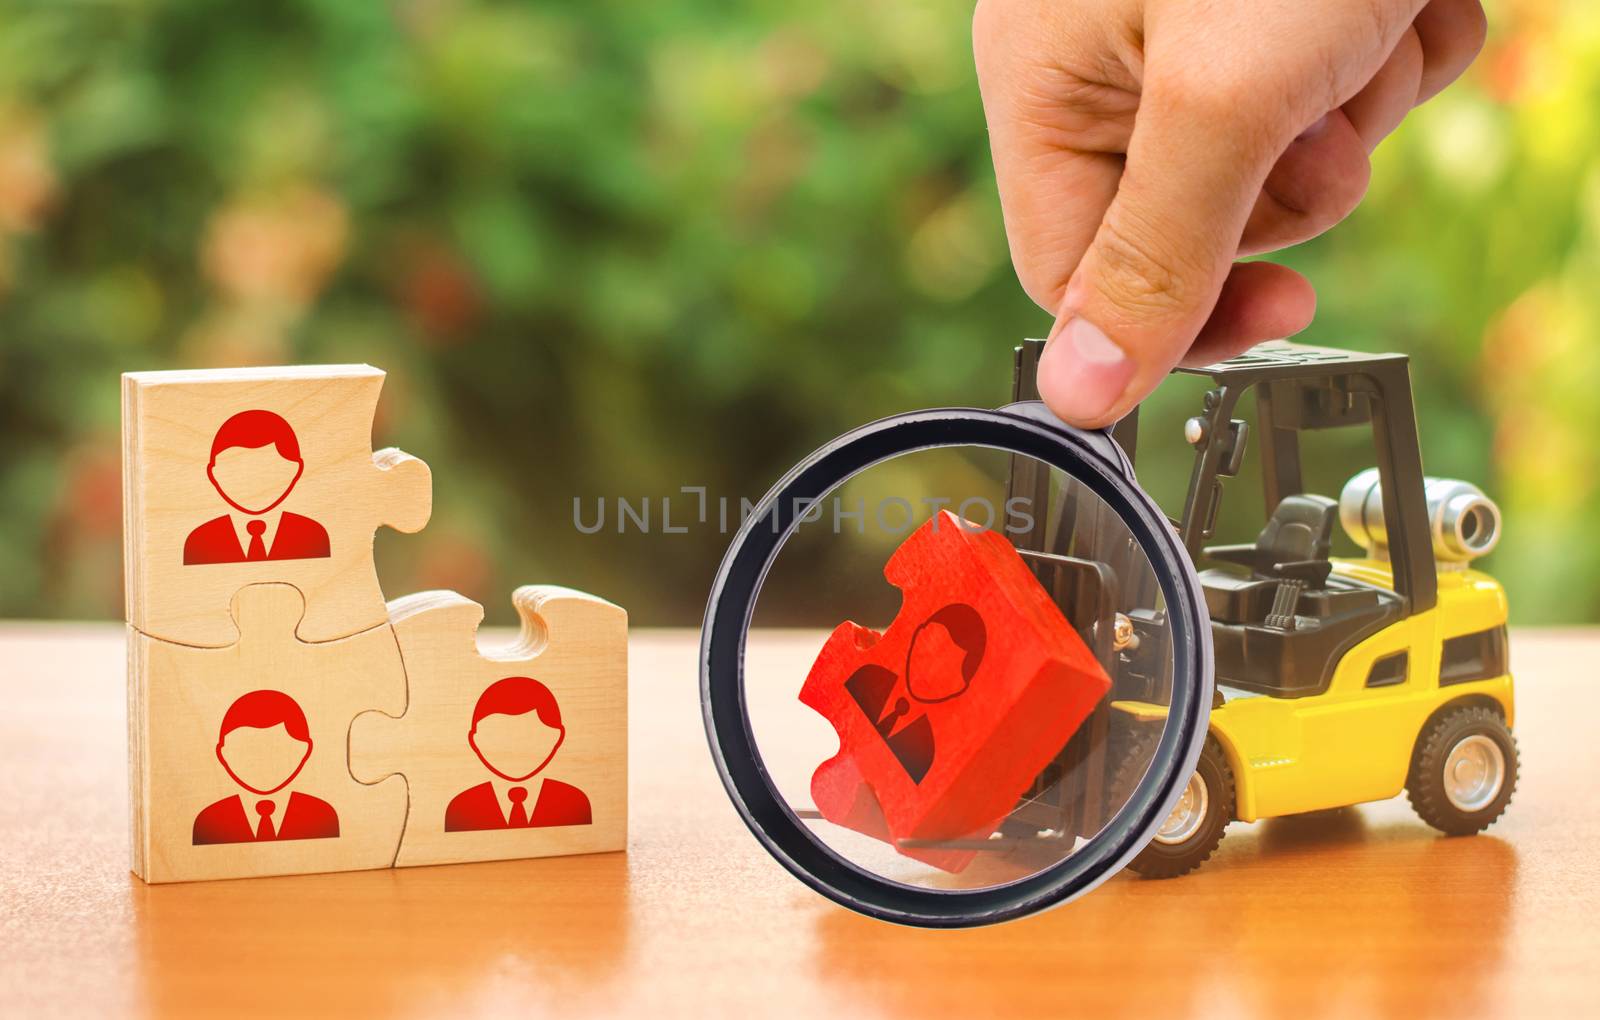 A magnifying glass looks at a forklift truck carries a red puzzle to the unfinished assembly of business team. Search, recruitment staff, hiring leader. Creating efficient and productive business unit by iLixe48